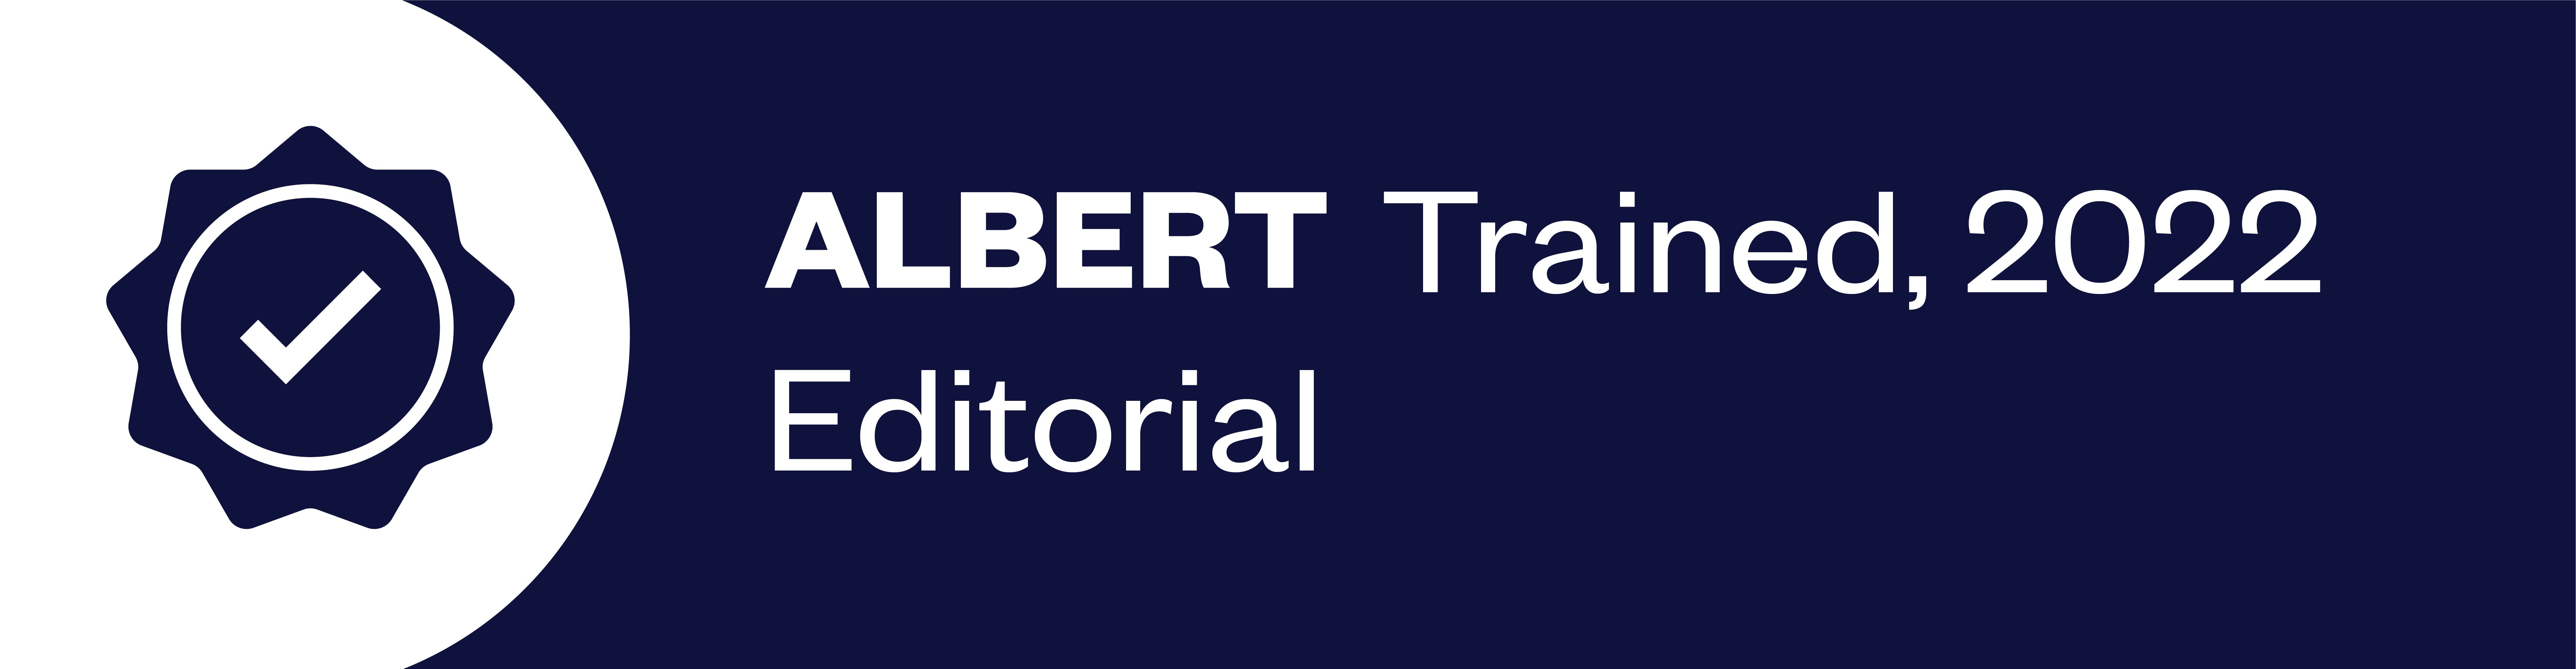 Albert Trained 2022 Editorial stamp